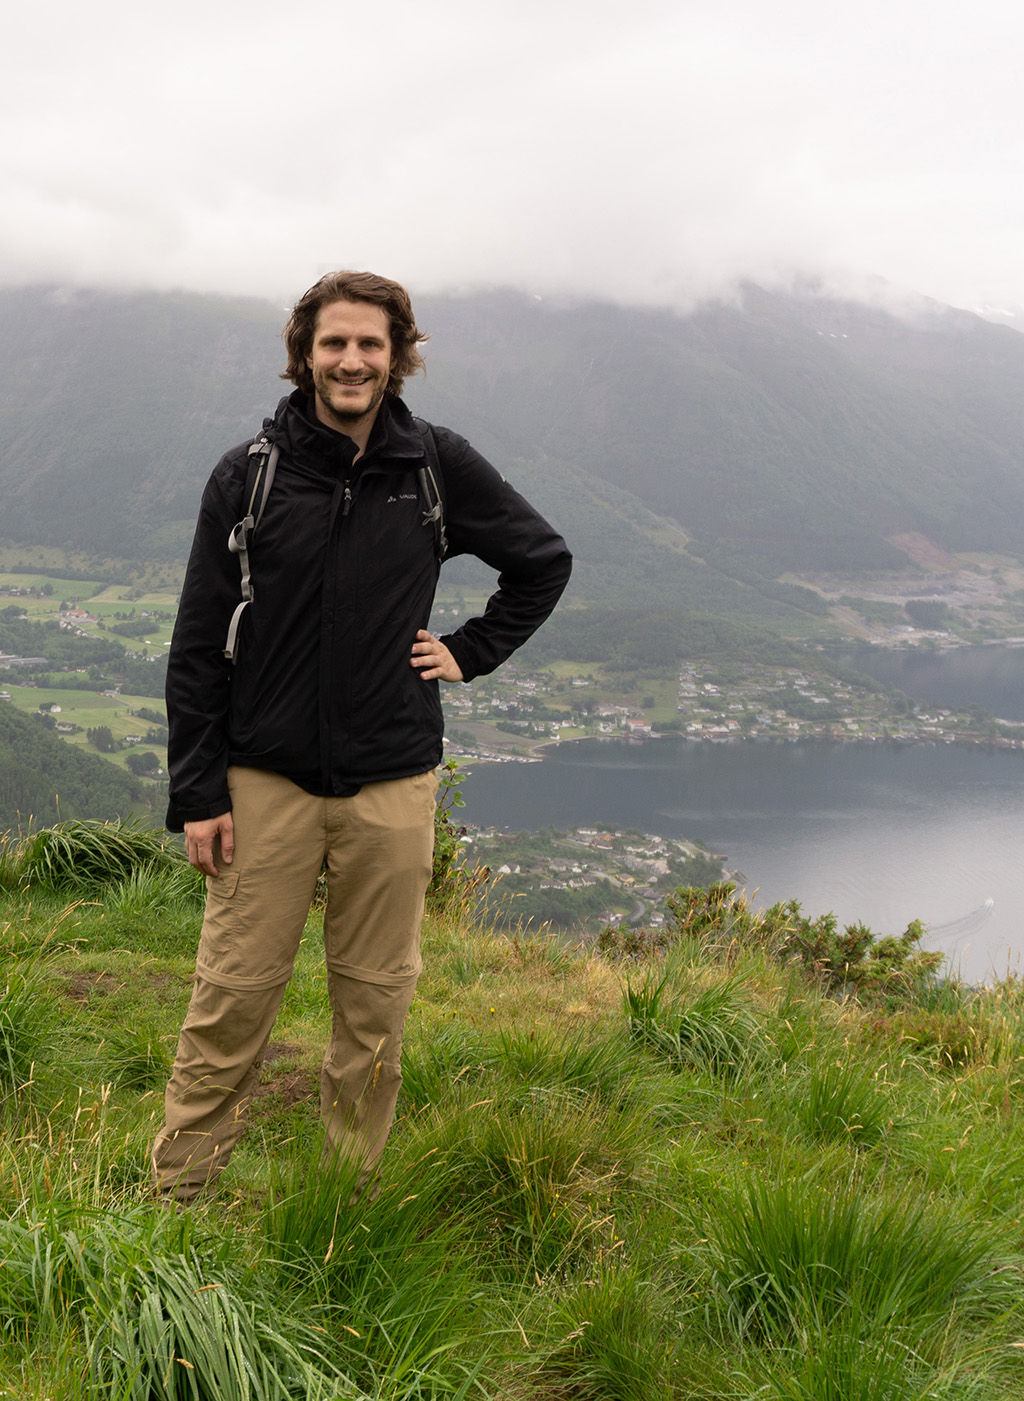 The picture shows Konstantin on a mountain with fjord and fog in the background during a hiking tour in Norway.